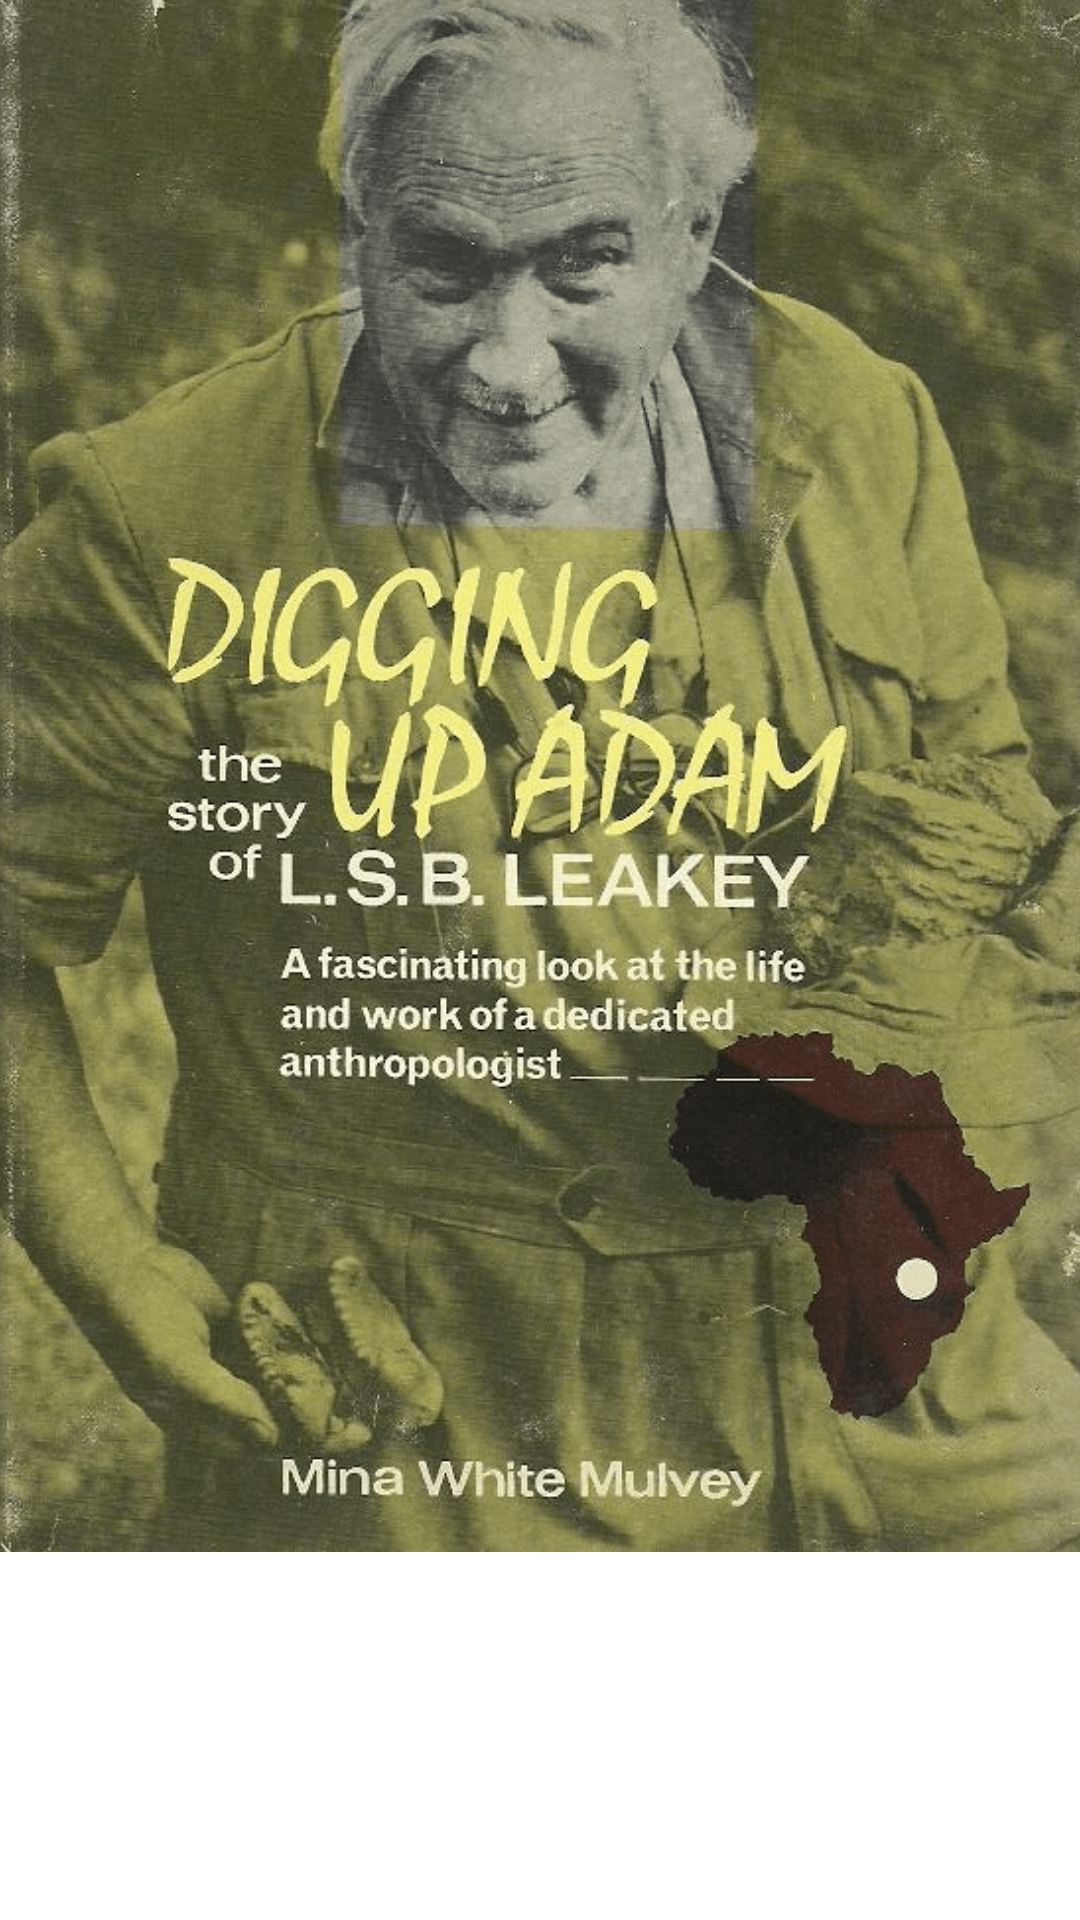 Digging up Adam: The story of L.S.B. Leakey